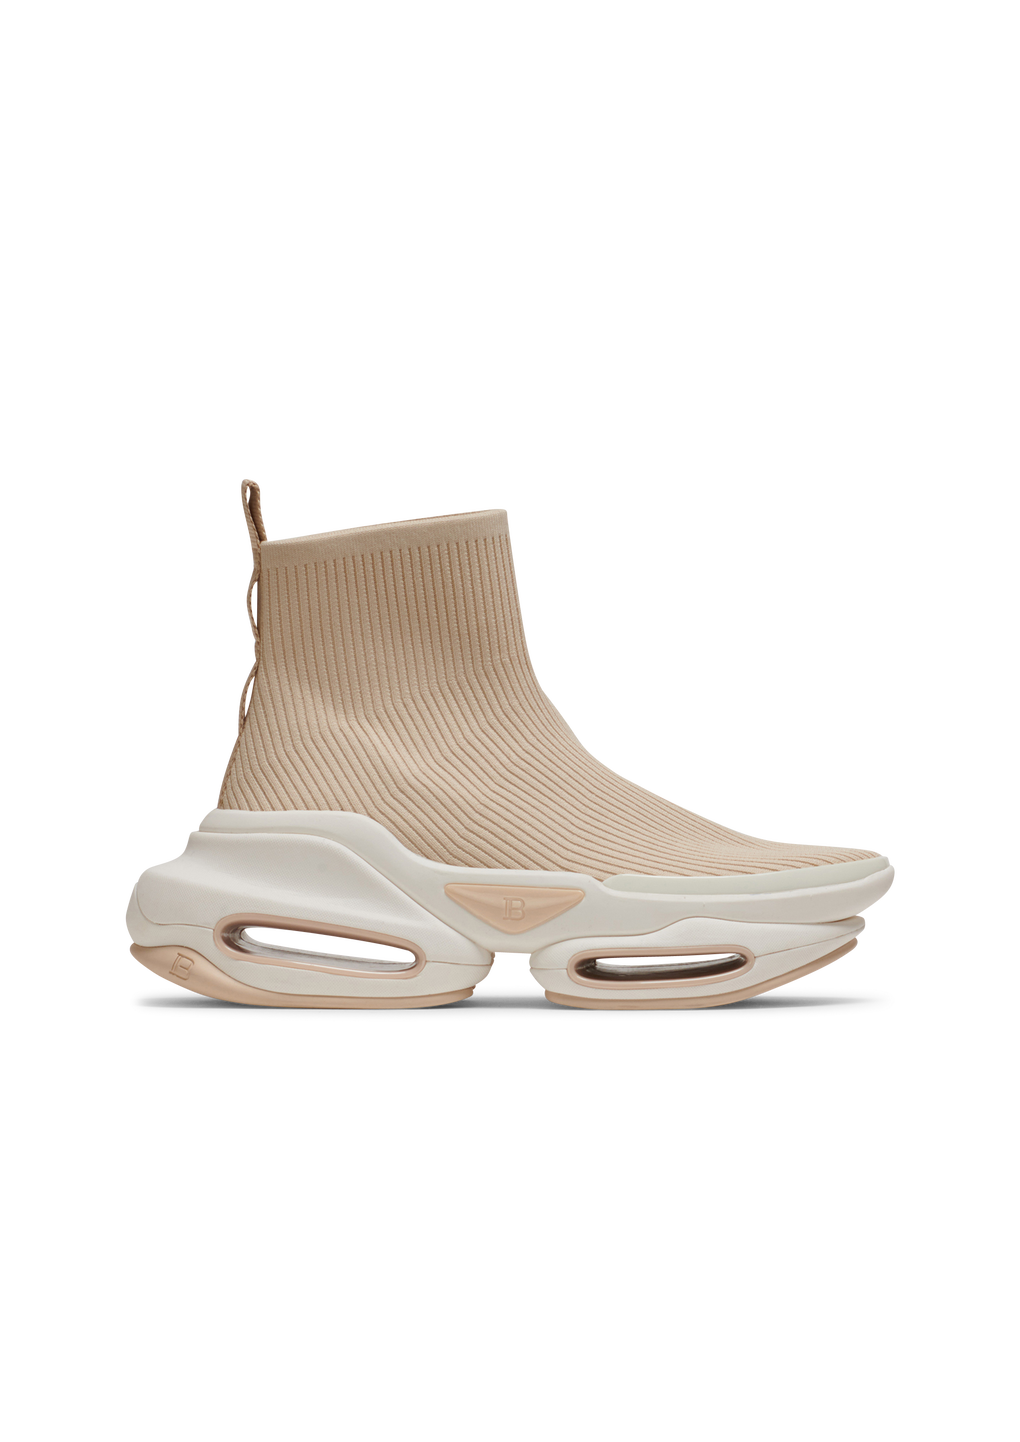 B-Bold knit high-top trainers, beige, hi-res